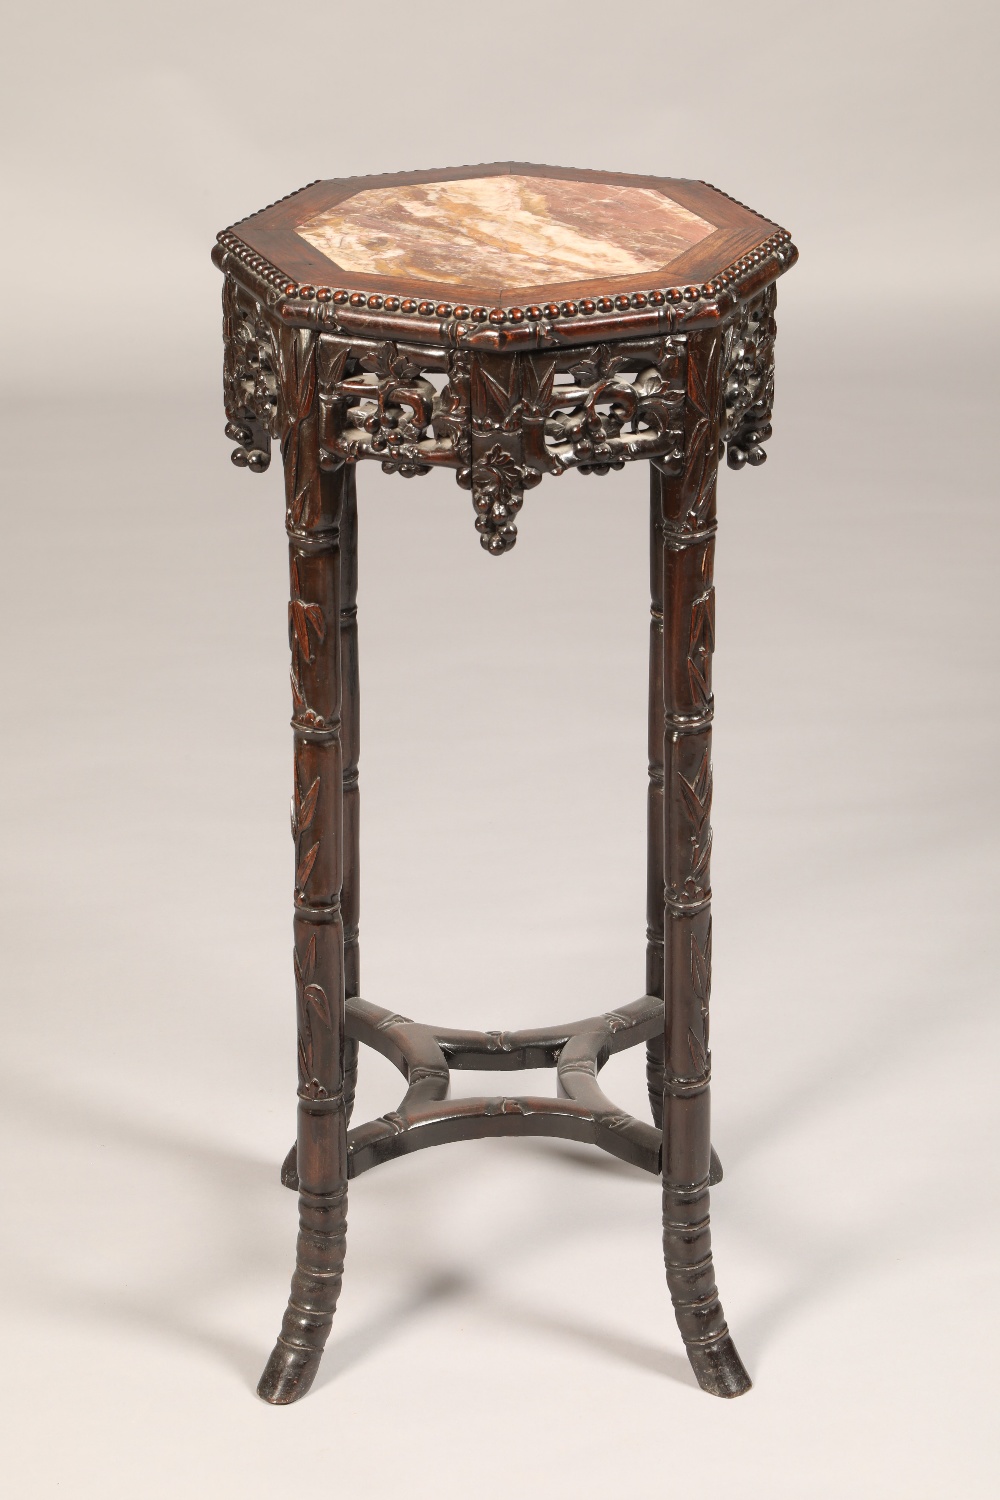 Cylinder carved hardwood Jardiniere stand, octagonal top with rouge marble inset, carved and pierced